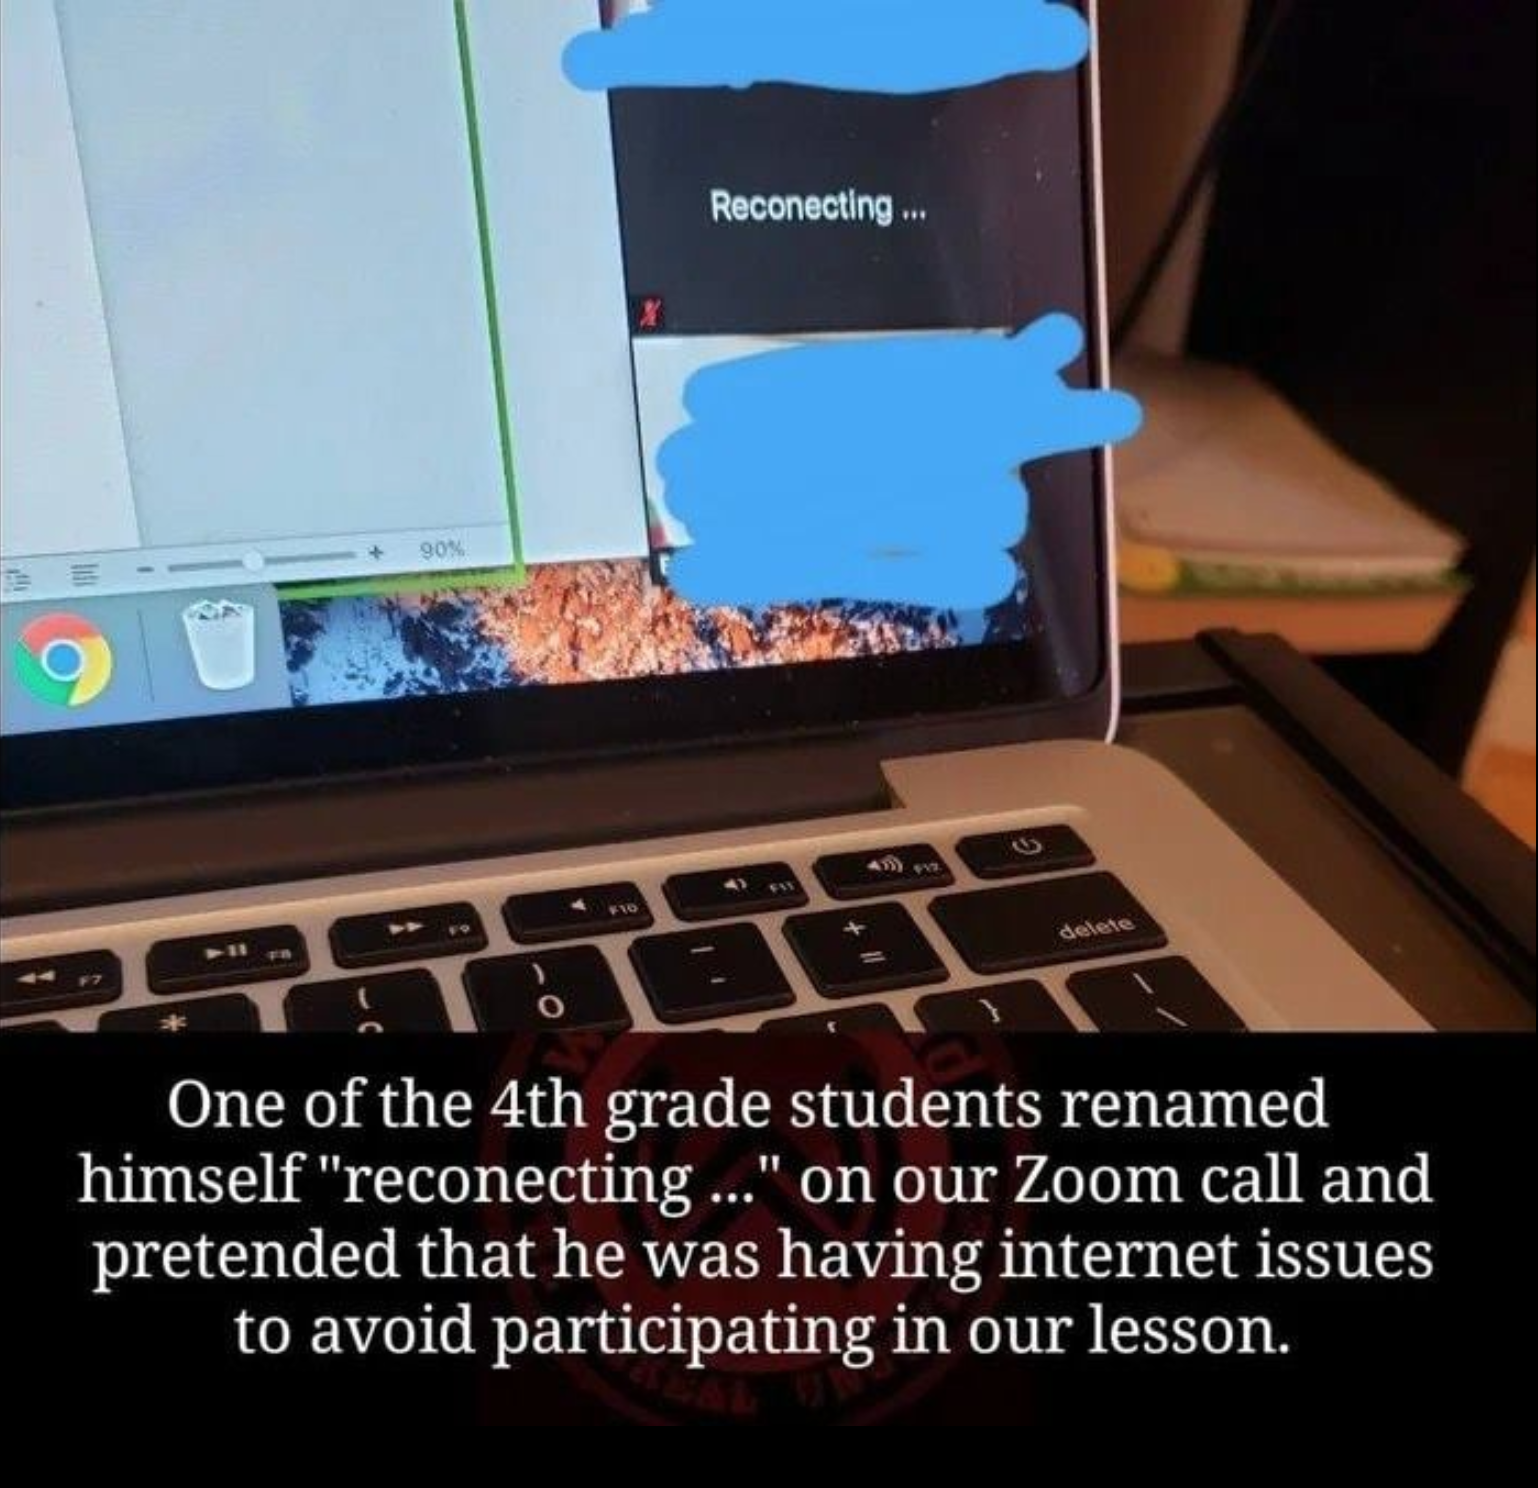 gaming memes and pics - 4th grade students reconnecting zoom - Reconecting .. Et One of the 4th grade students renamed himself